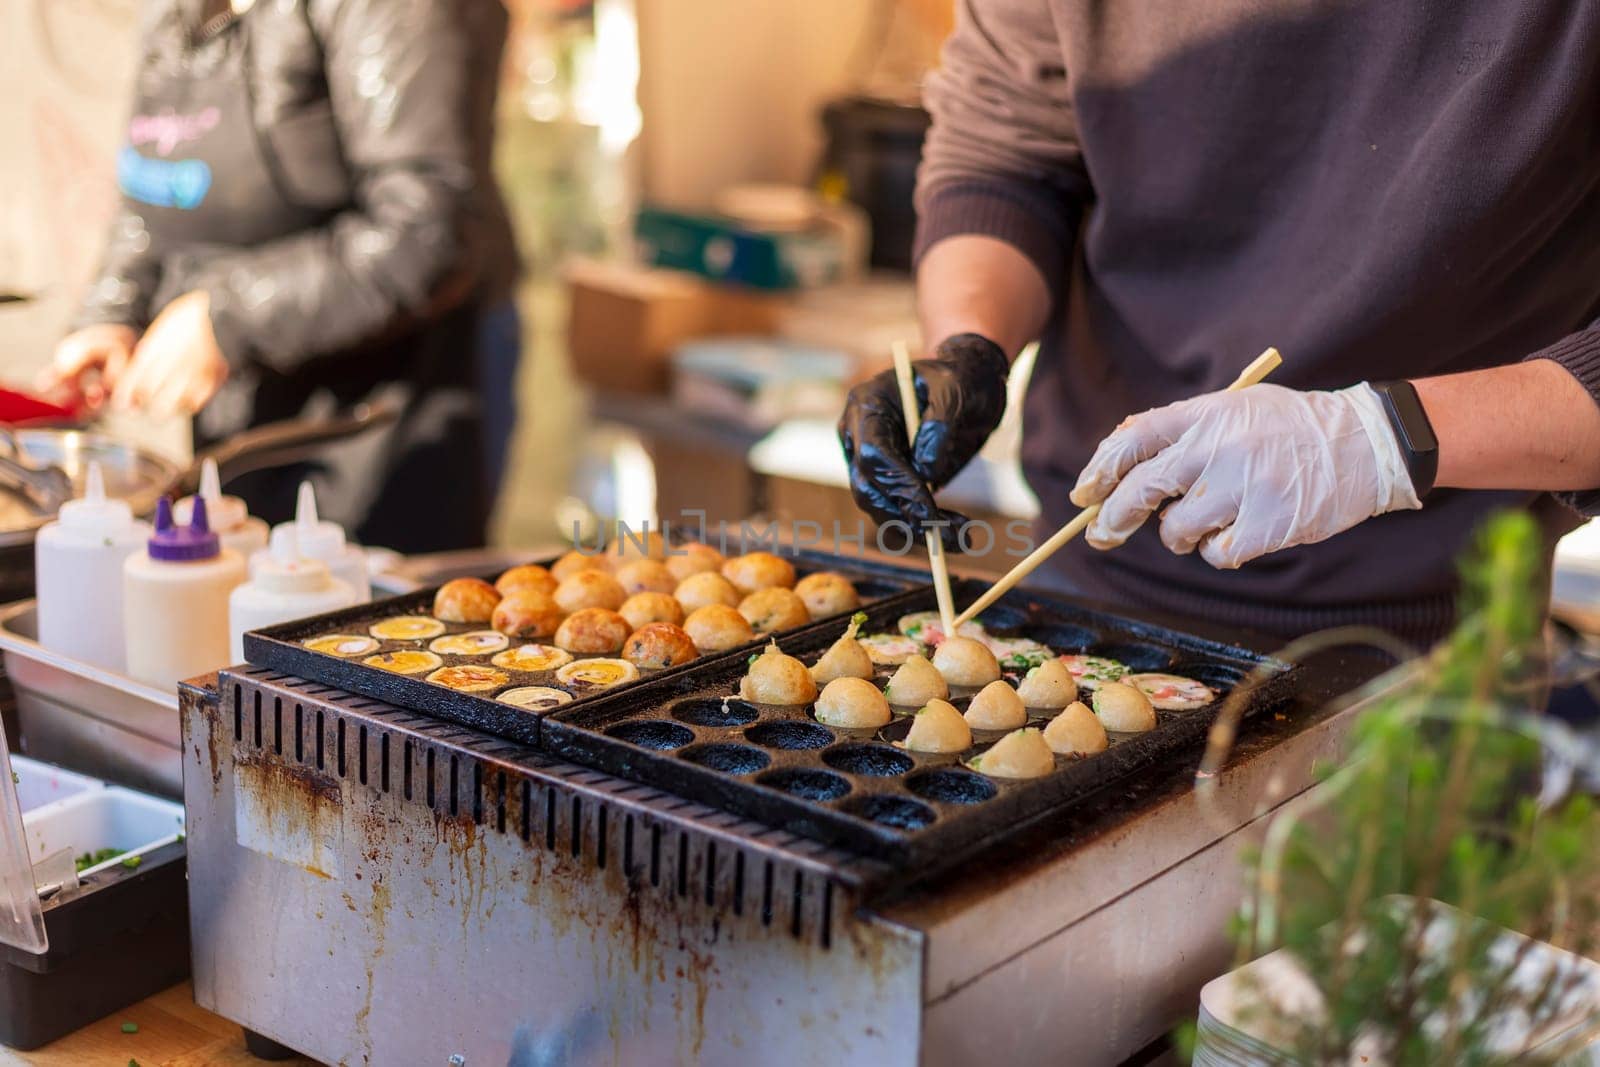 Process of cooking takoyaki balls. Japanese snacks and street food at the festival